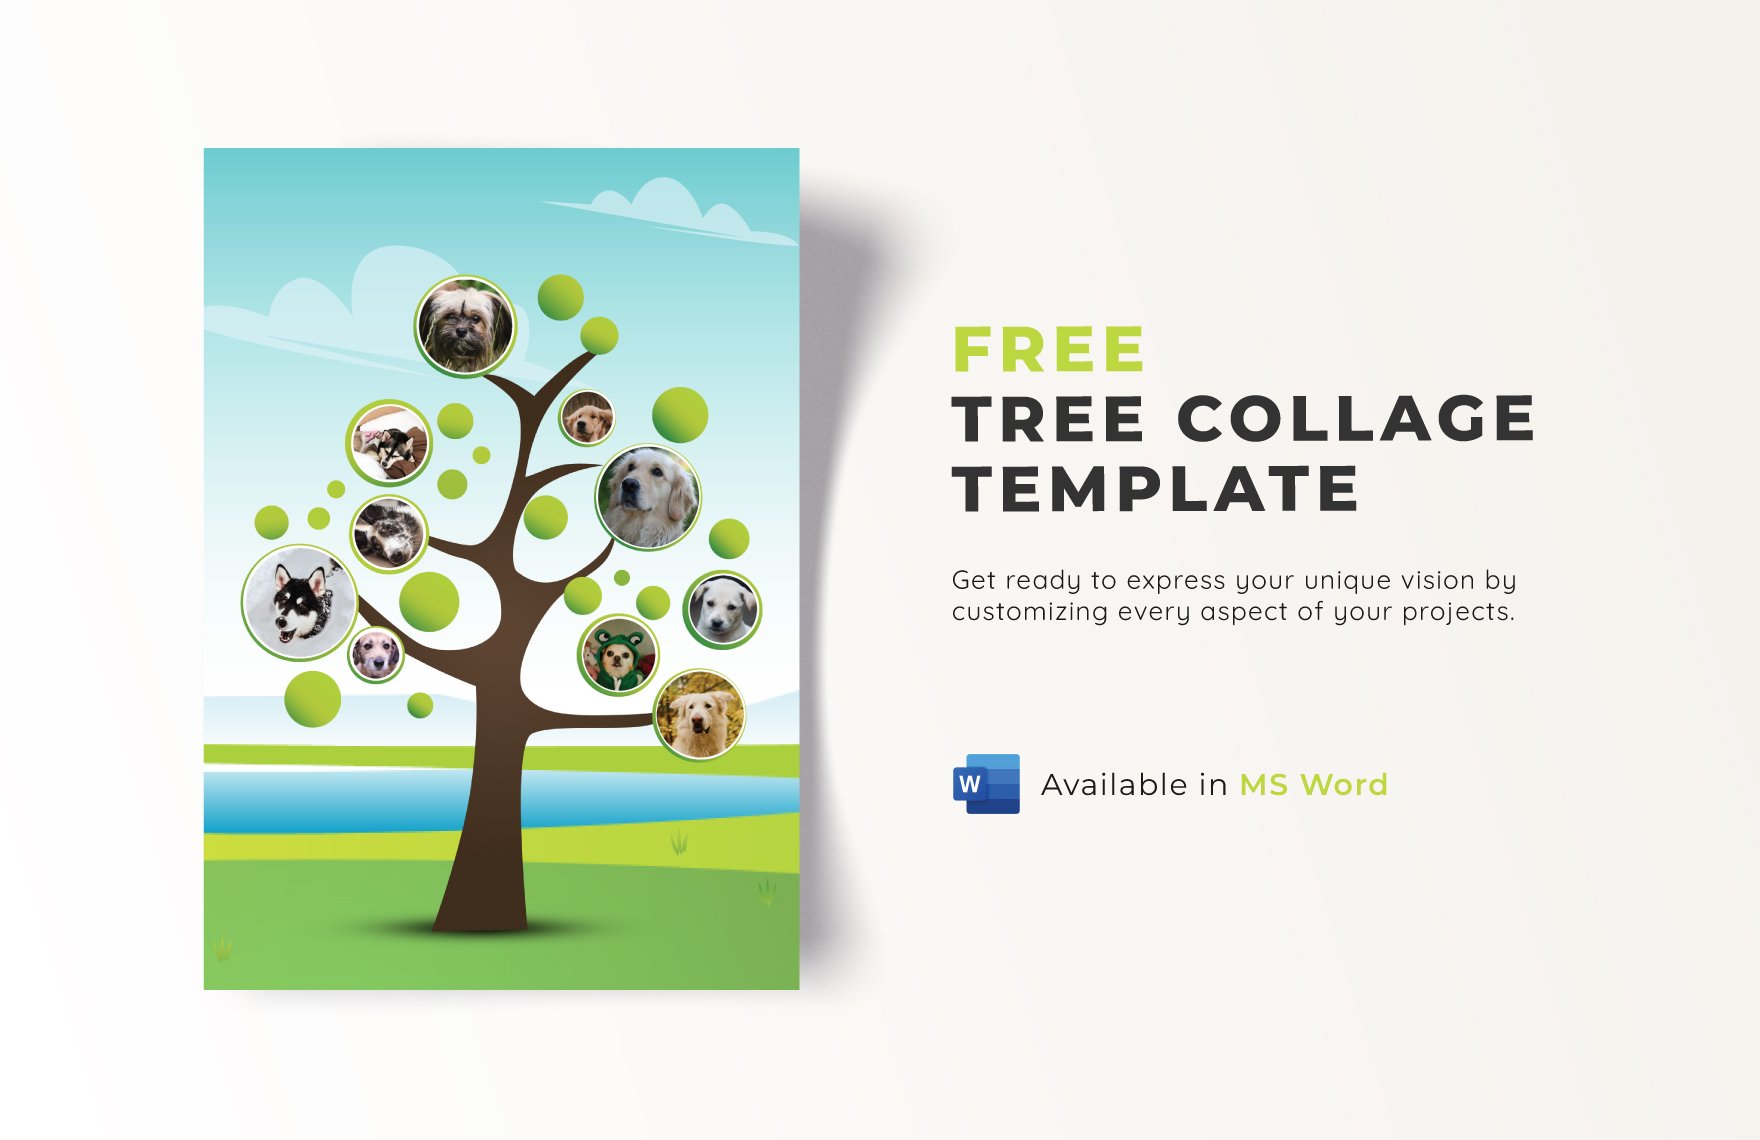 Tree Collage Template